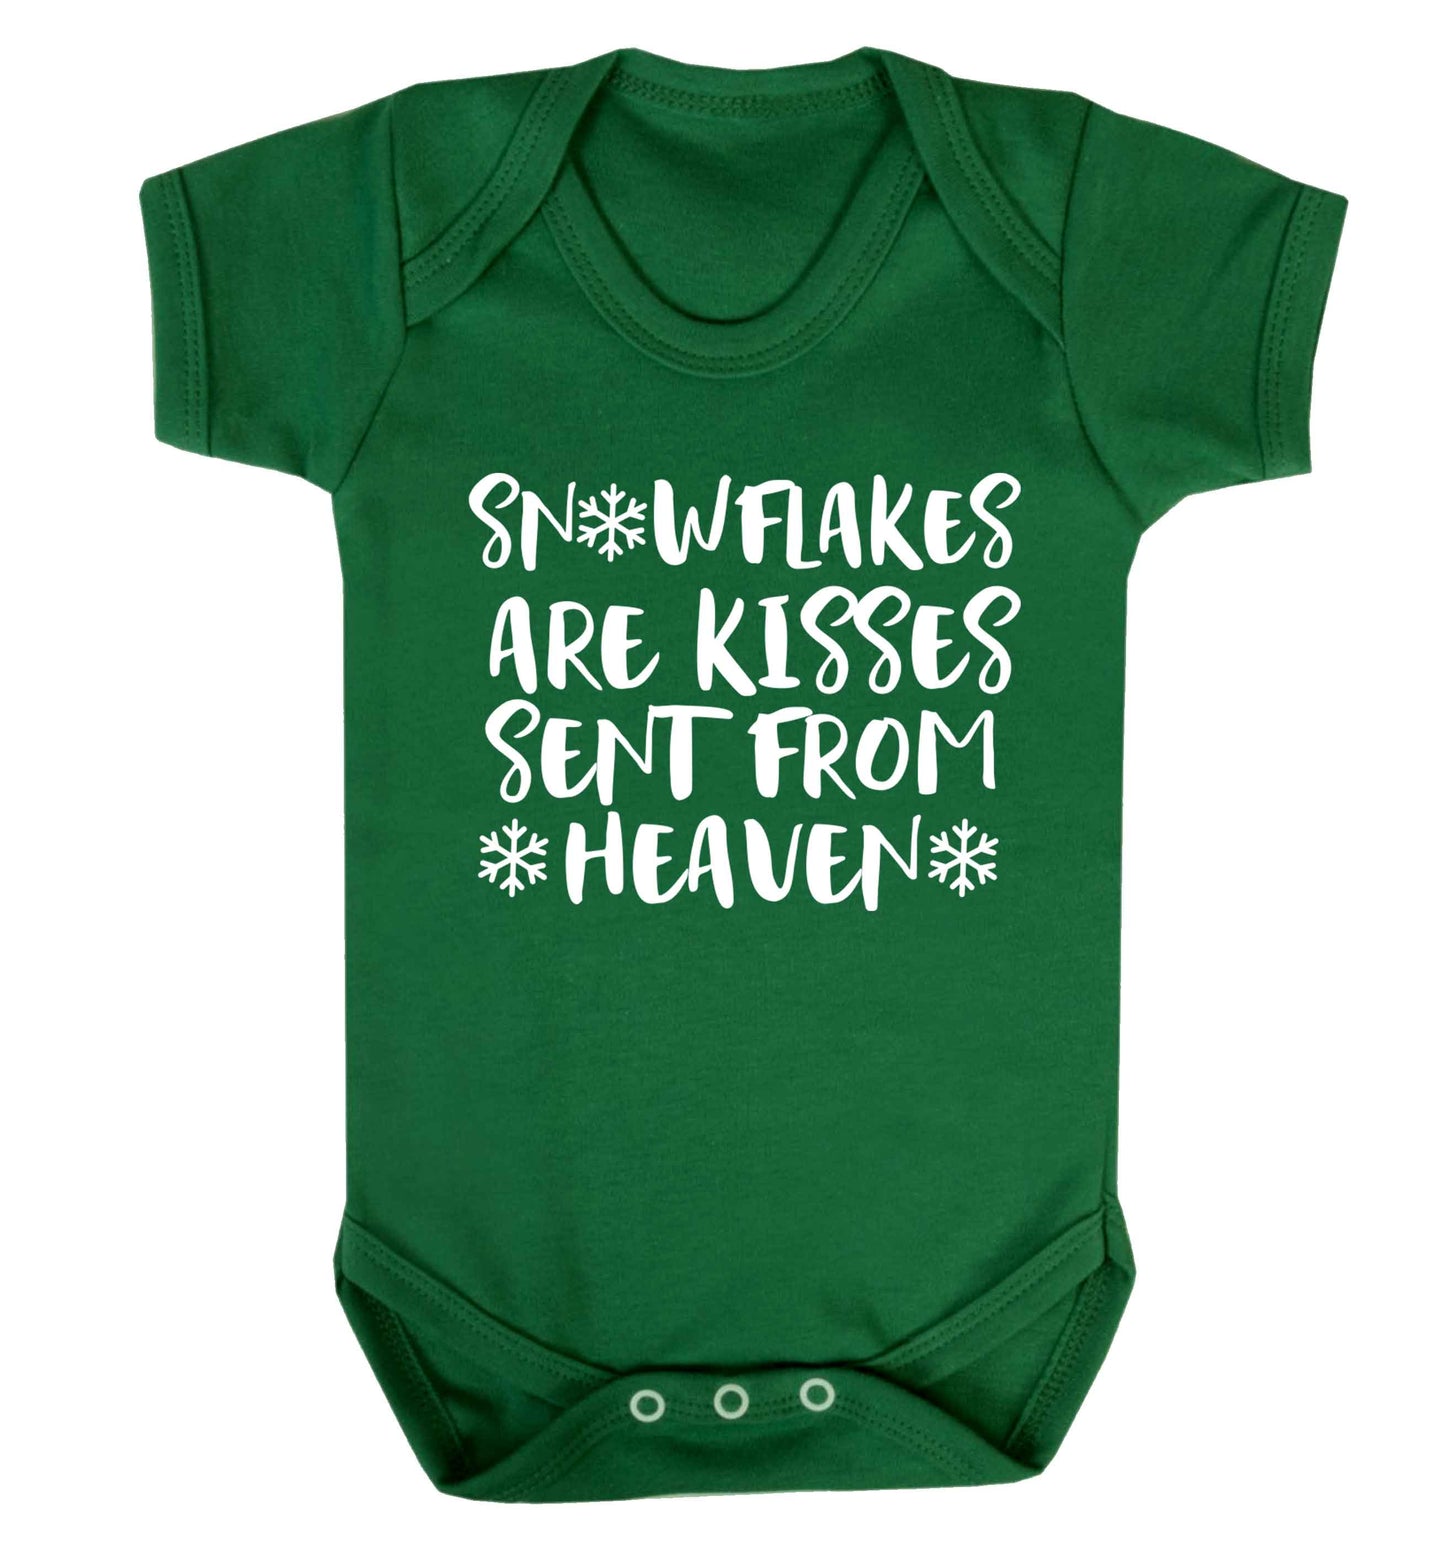 Snowflakes are kisses sent from heaven Baby Vest green 18-24 months